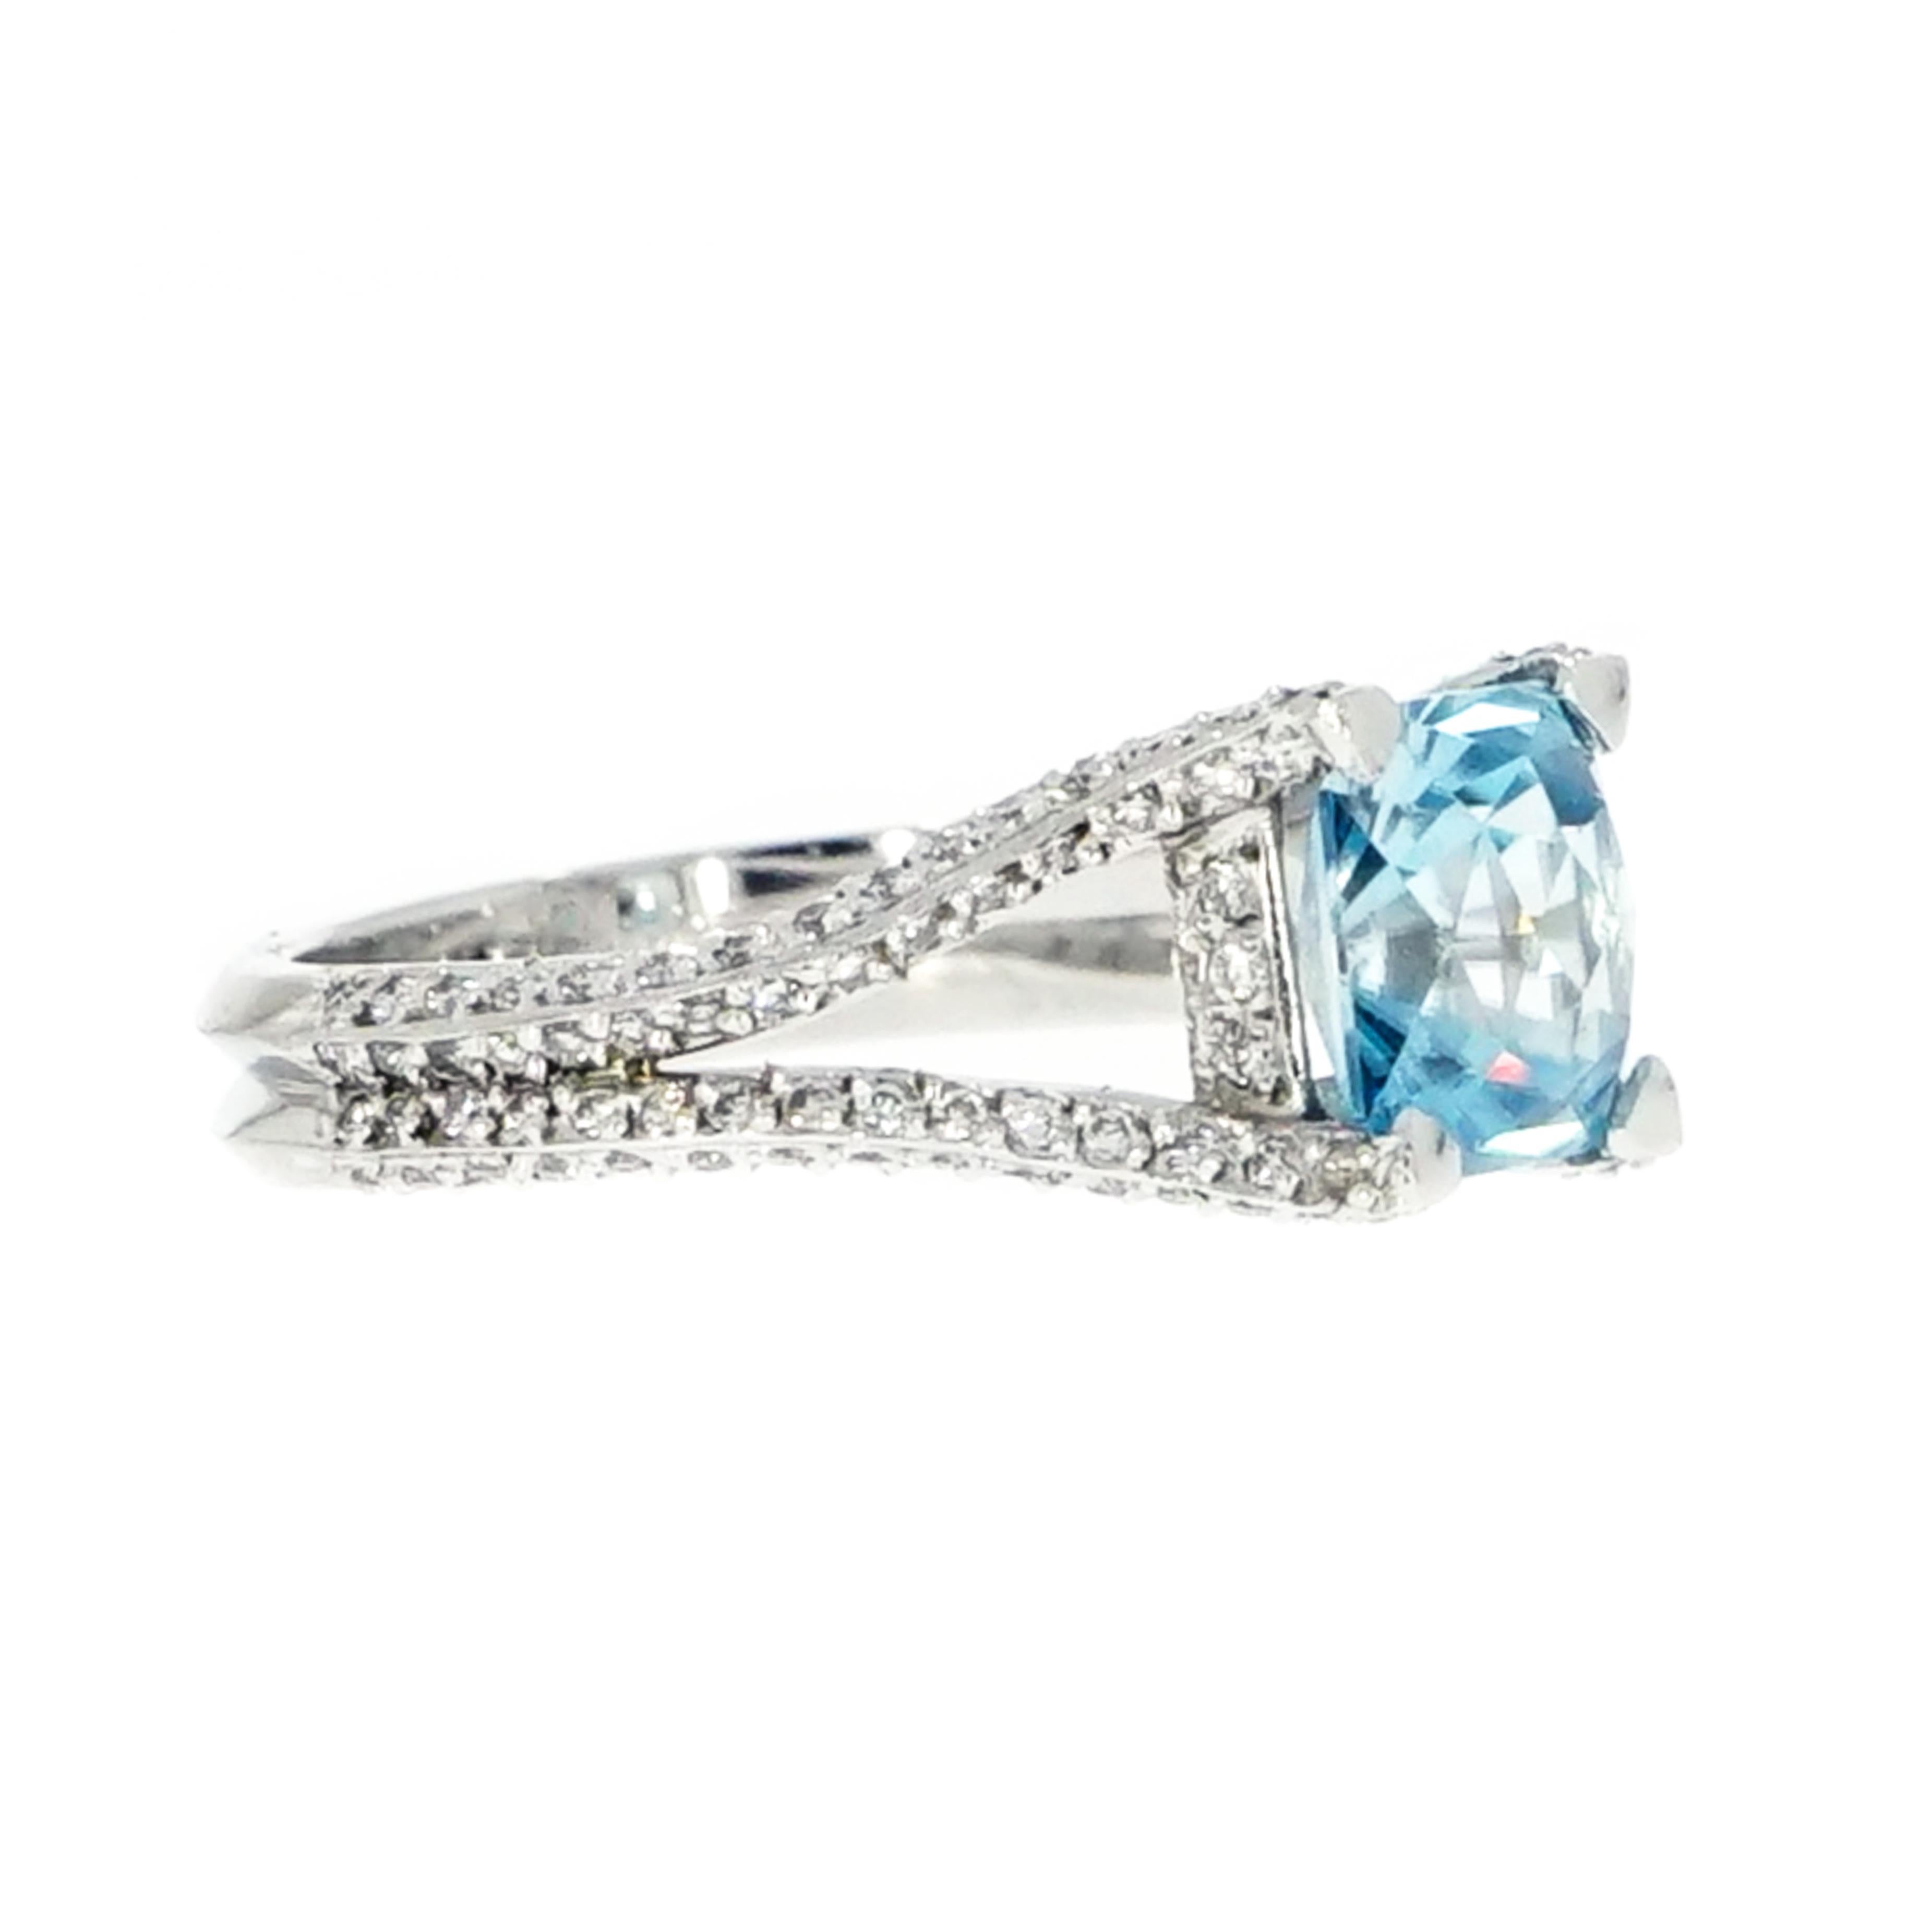 Experience the uniqueness of this Blue Zircon Ring. 
Blue zircon has some unique properties that make it very popular with gemstone aficionados. Not only does have outstanding brilliance but it also has very strong dispersion or fire. Traditionally